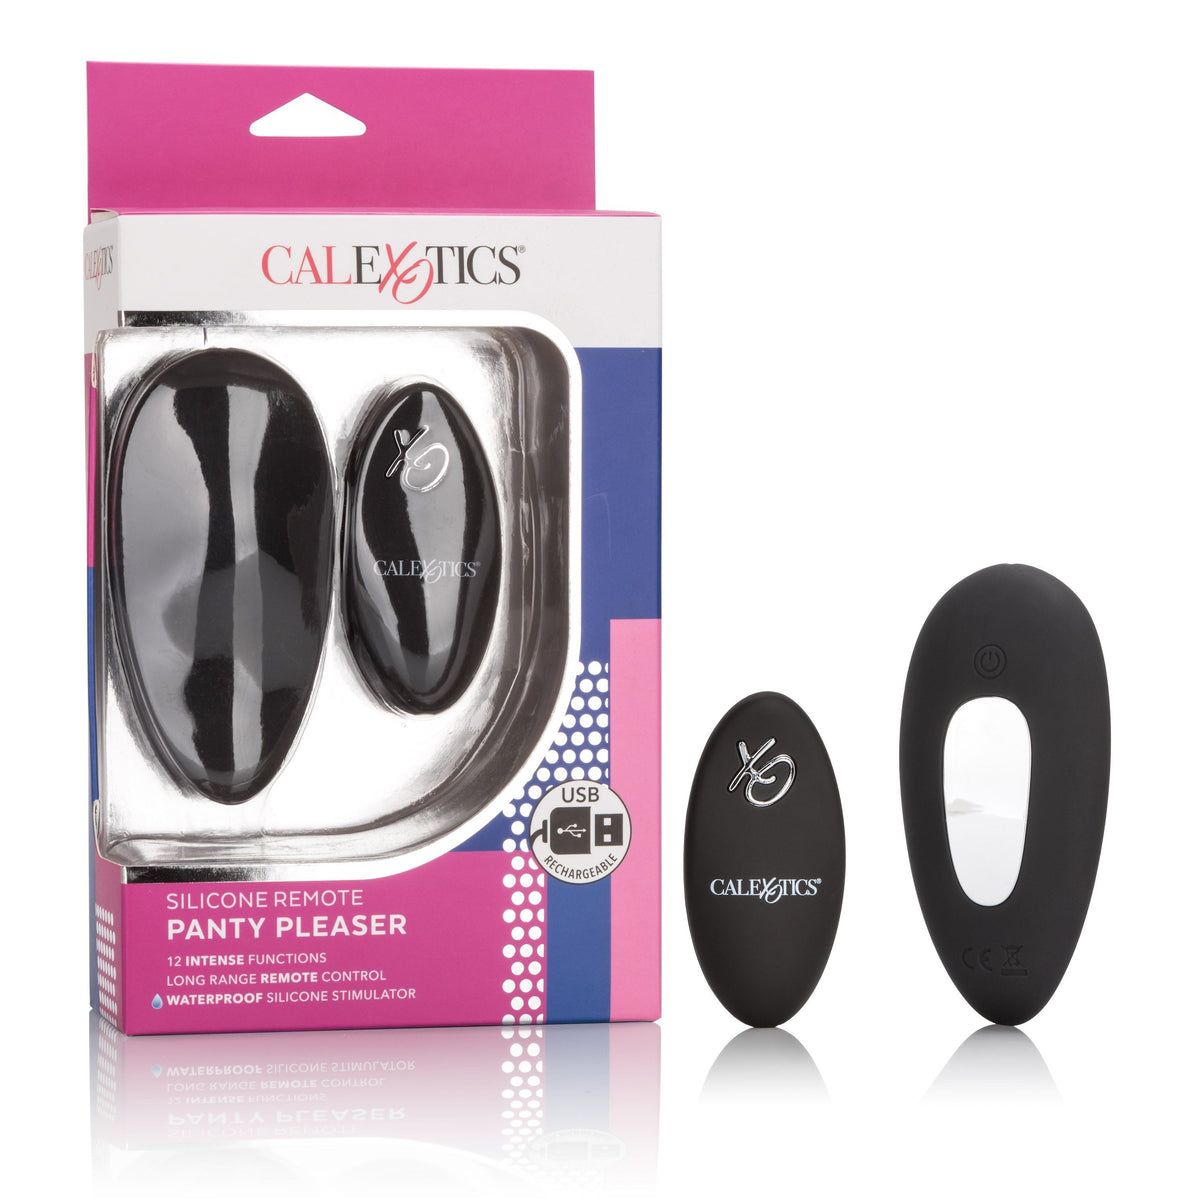 California Exotics - Silicone Remote Panty Pleaser Vibrator (Black) -  Panties Massager Remote Control (Vibration) Rechargeable  Durio.sg